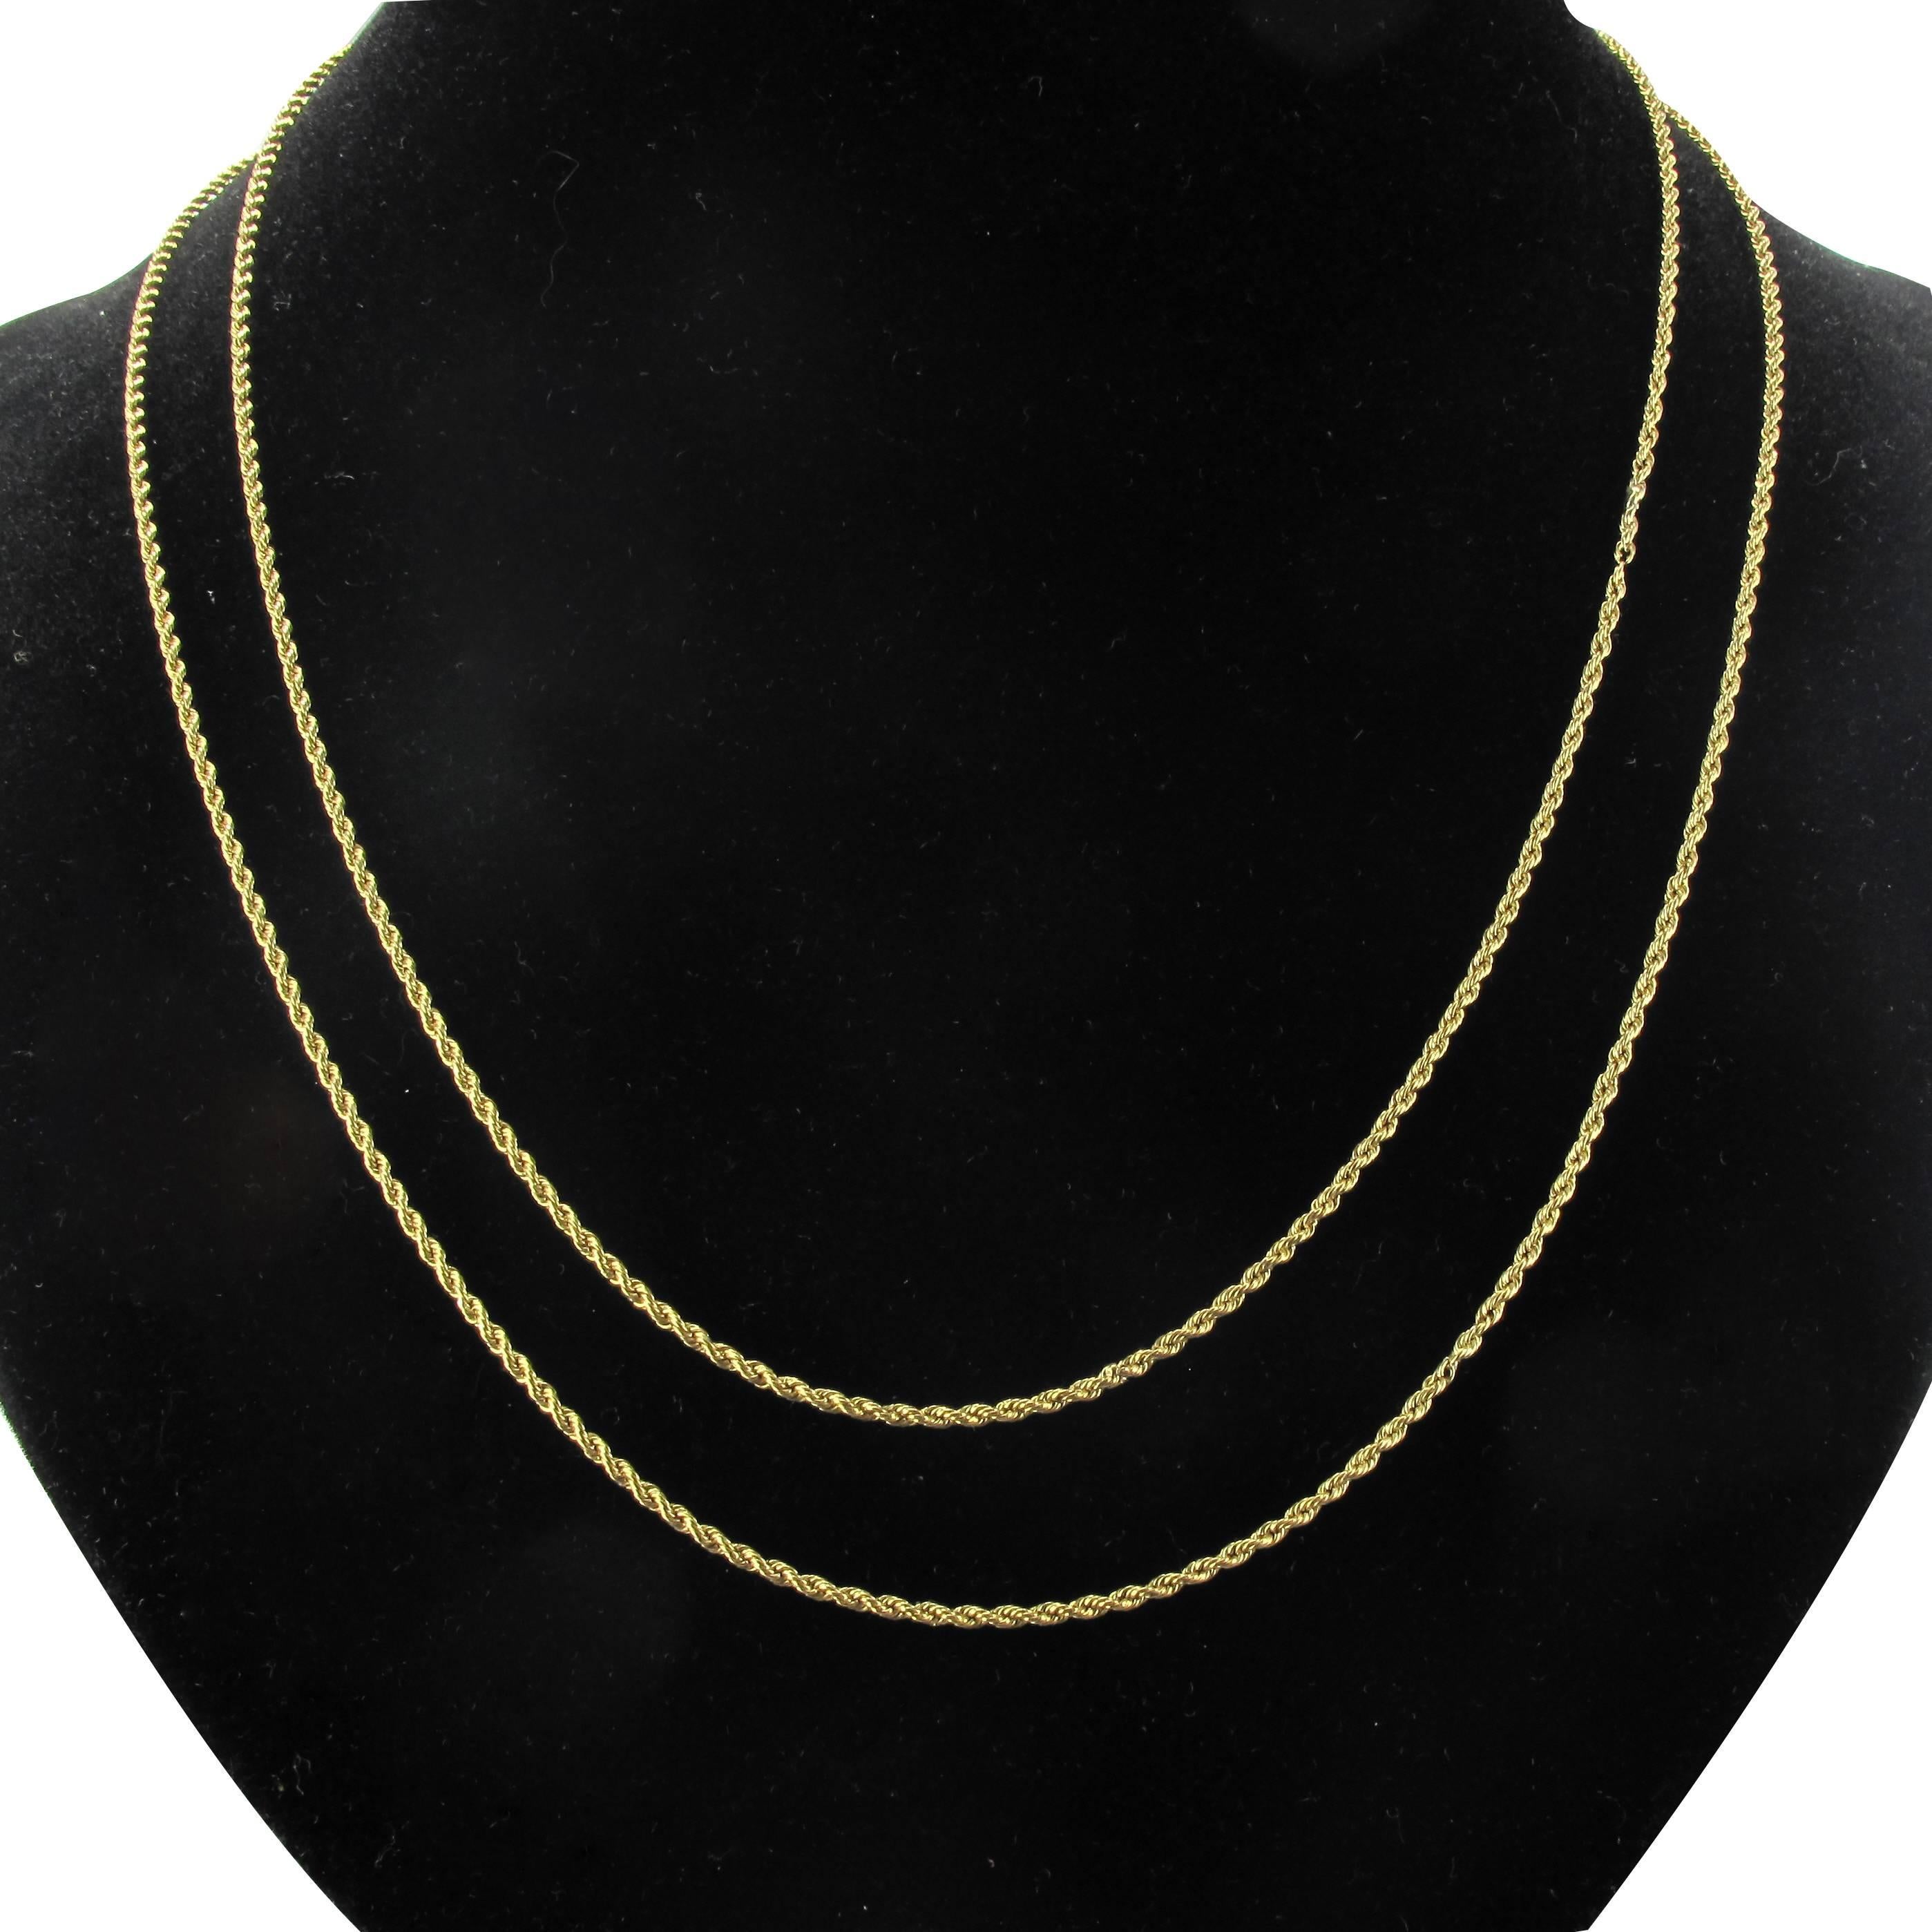 Long necklace in 18 karat yellow gold, eagle head hallmark. 
This matinee chain necklace is composed of twisted gold double links. The chains are connected by an engraved golden bead decorated with green gold leaves. This is attached to a screw hook